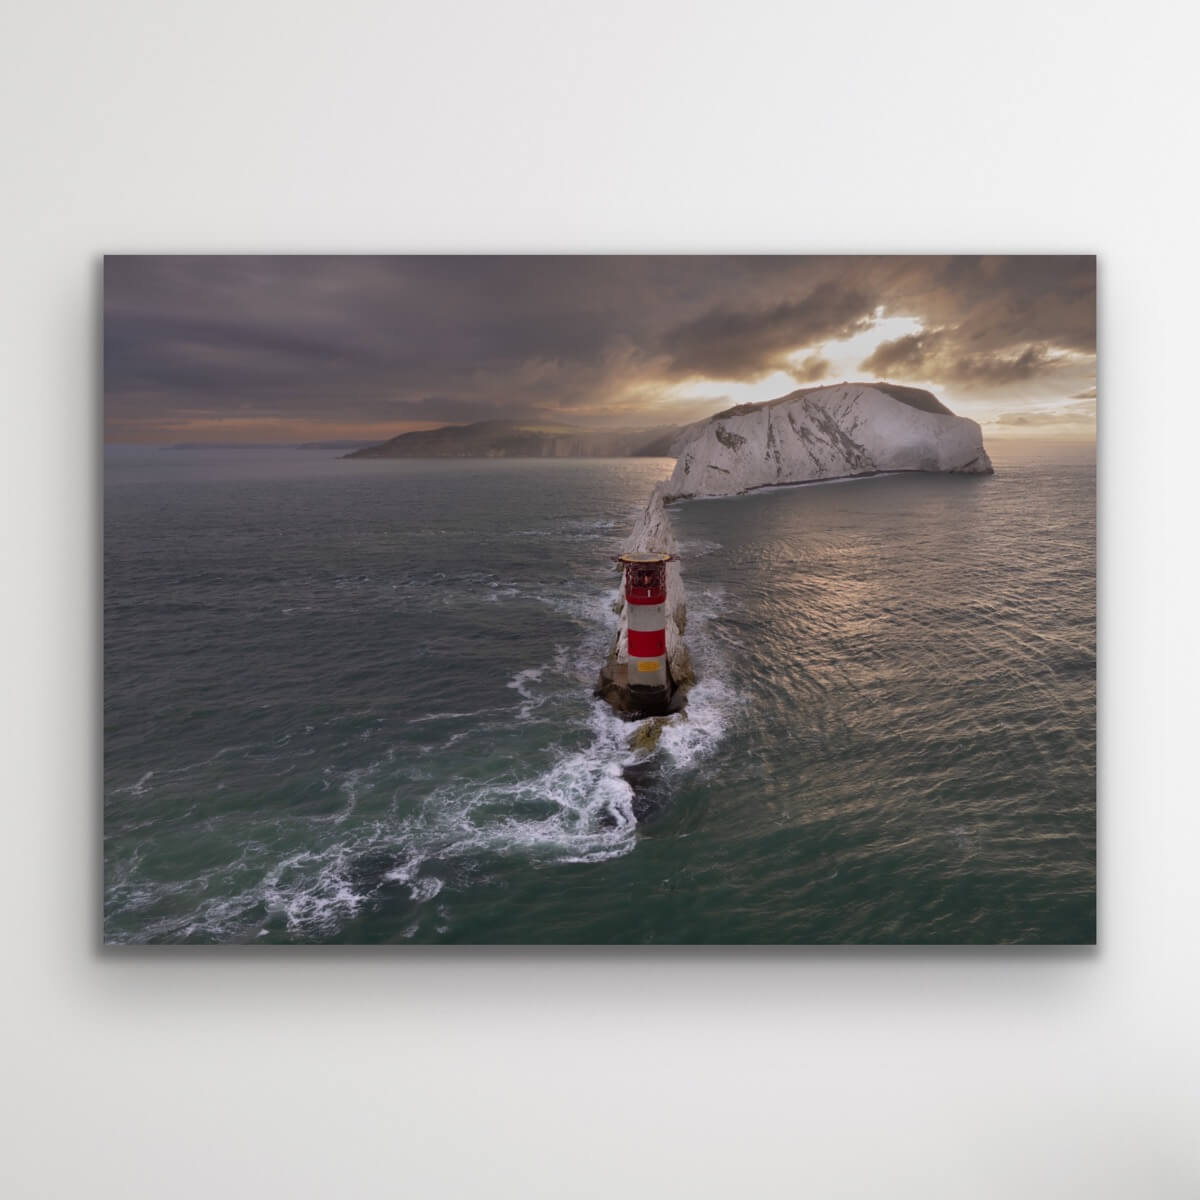 The Needles Moody Sunrise Photograph Gallery Isle of Wight Landscape Prints